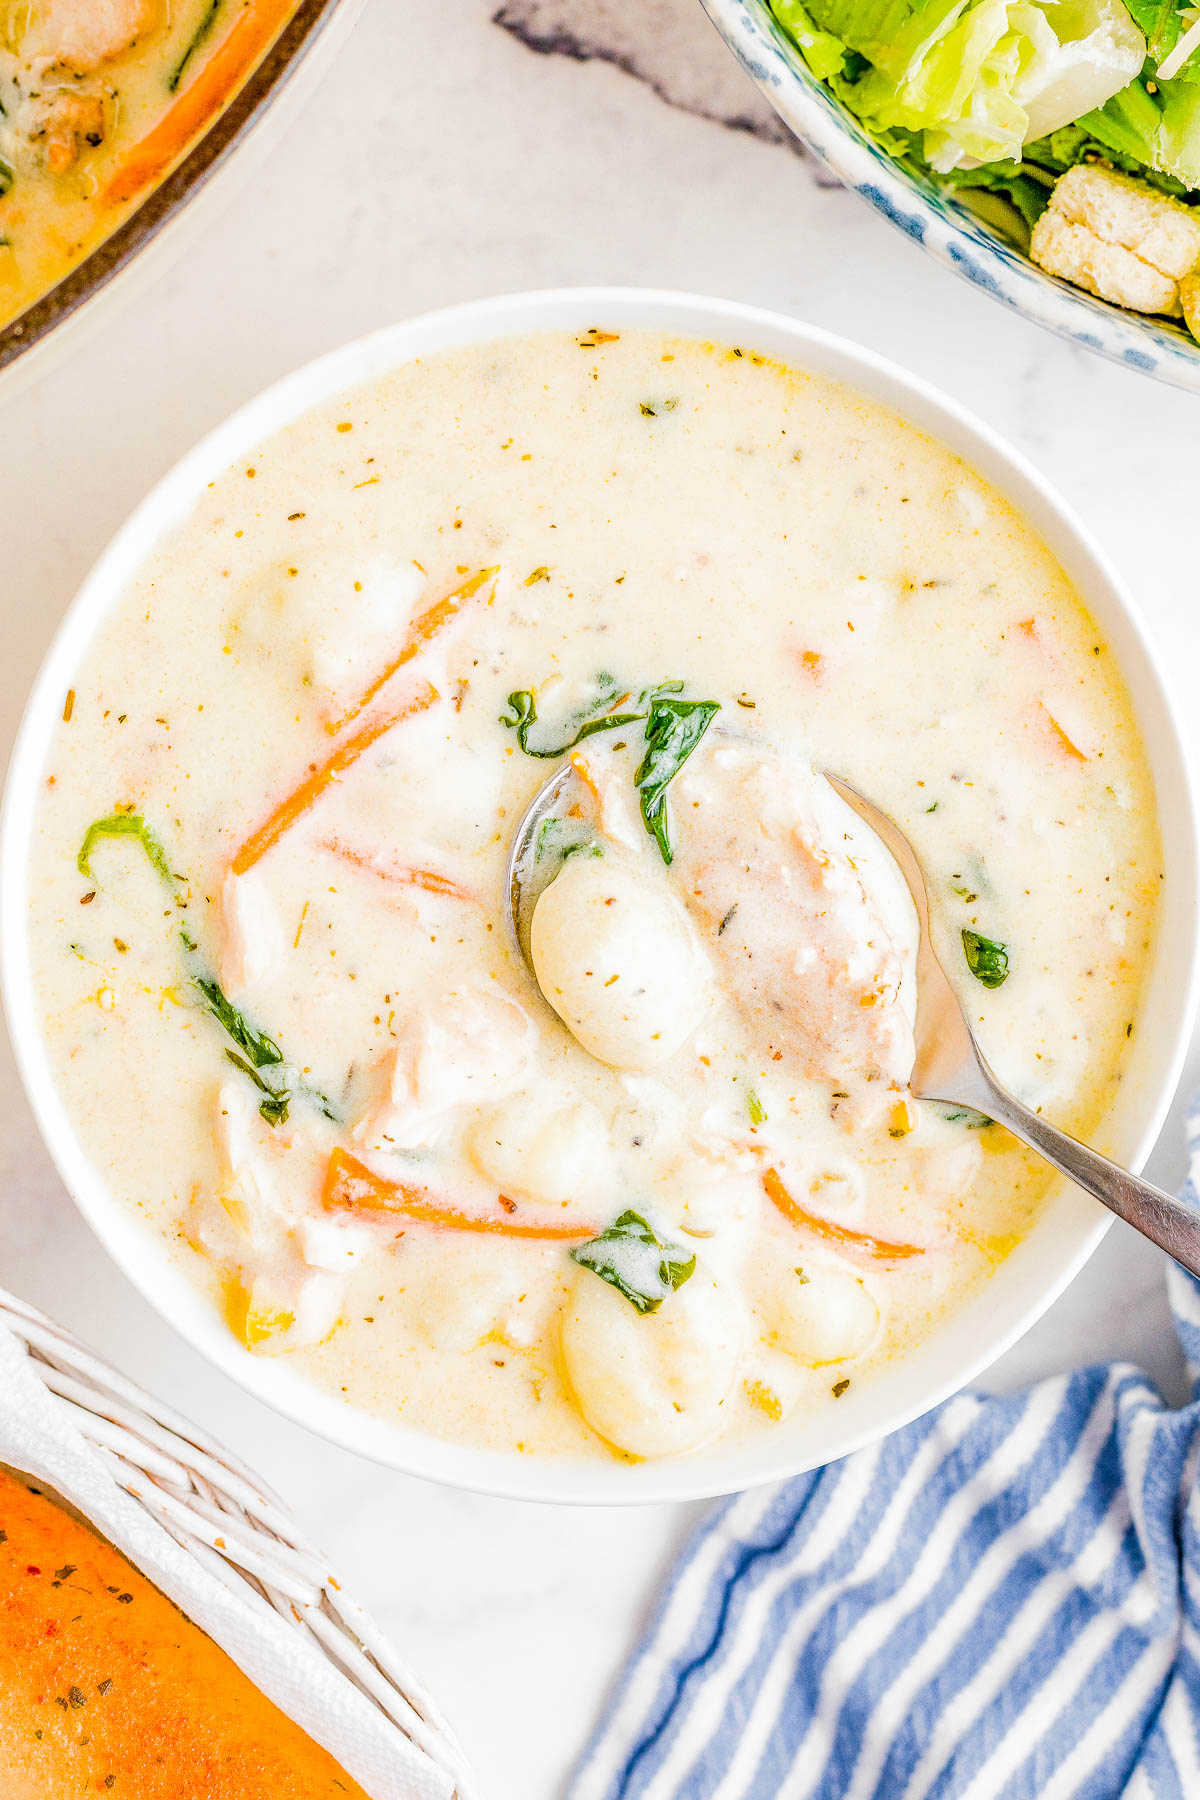 Chicken Gnocchi Soup - This Olive Garden Copycat recipe is so EASY, made in one pot, and ready in just 30 minutes! There's an abundance of chicken and tender gnocchi, along with onions, carrots, and garlic for layers of flavor. Fresh spinach adds texture while the creamy broth makes this the ULTIMATE comfort food soup recipe that the whole family will LOVE! We think it's even BETTER than the restaurant version!